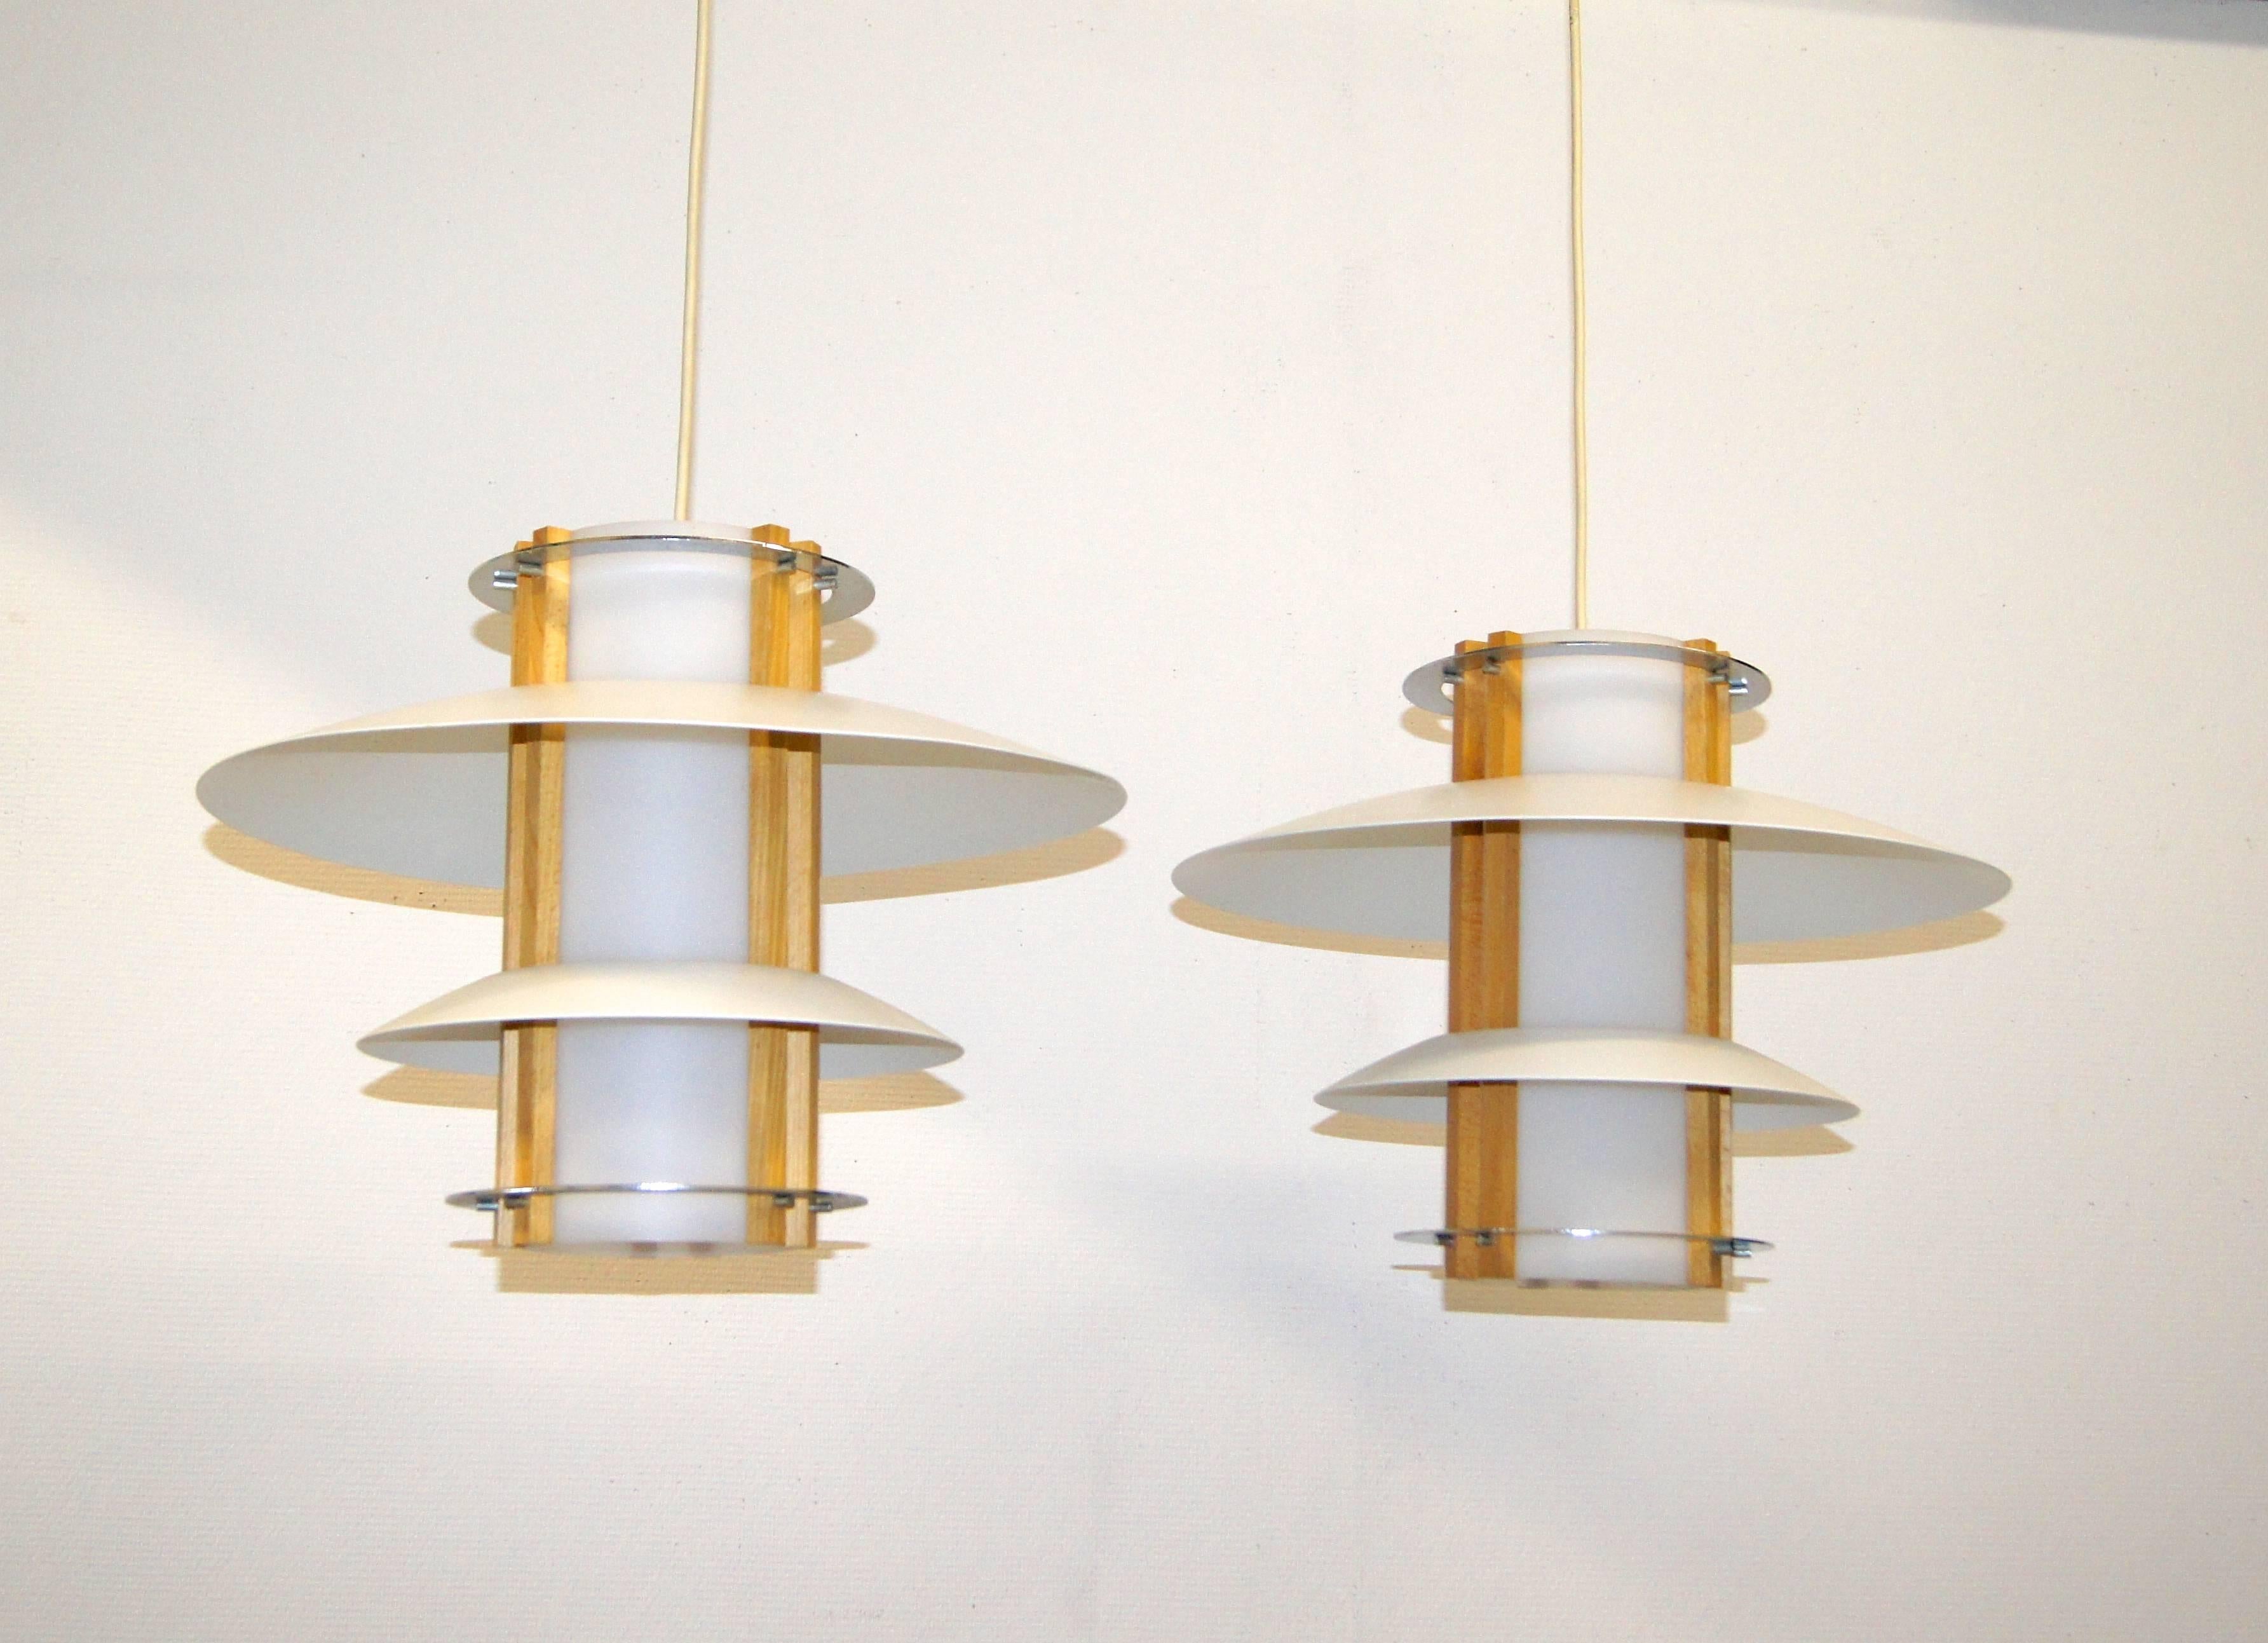 Late 20th Century Swedish Minimalist Saucer Lamps For Sale